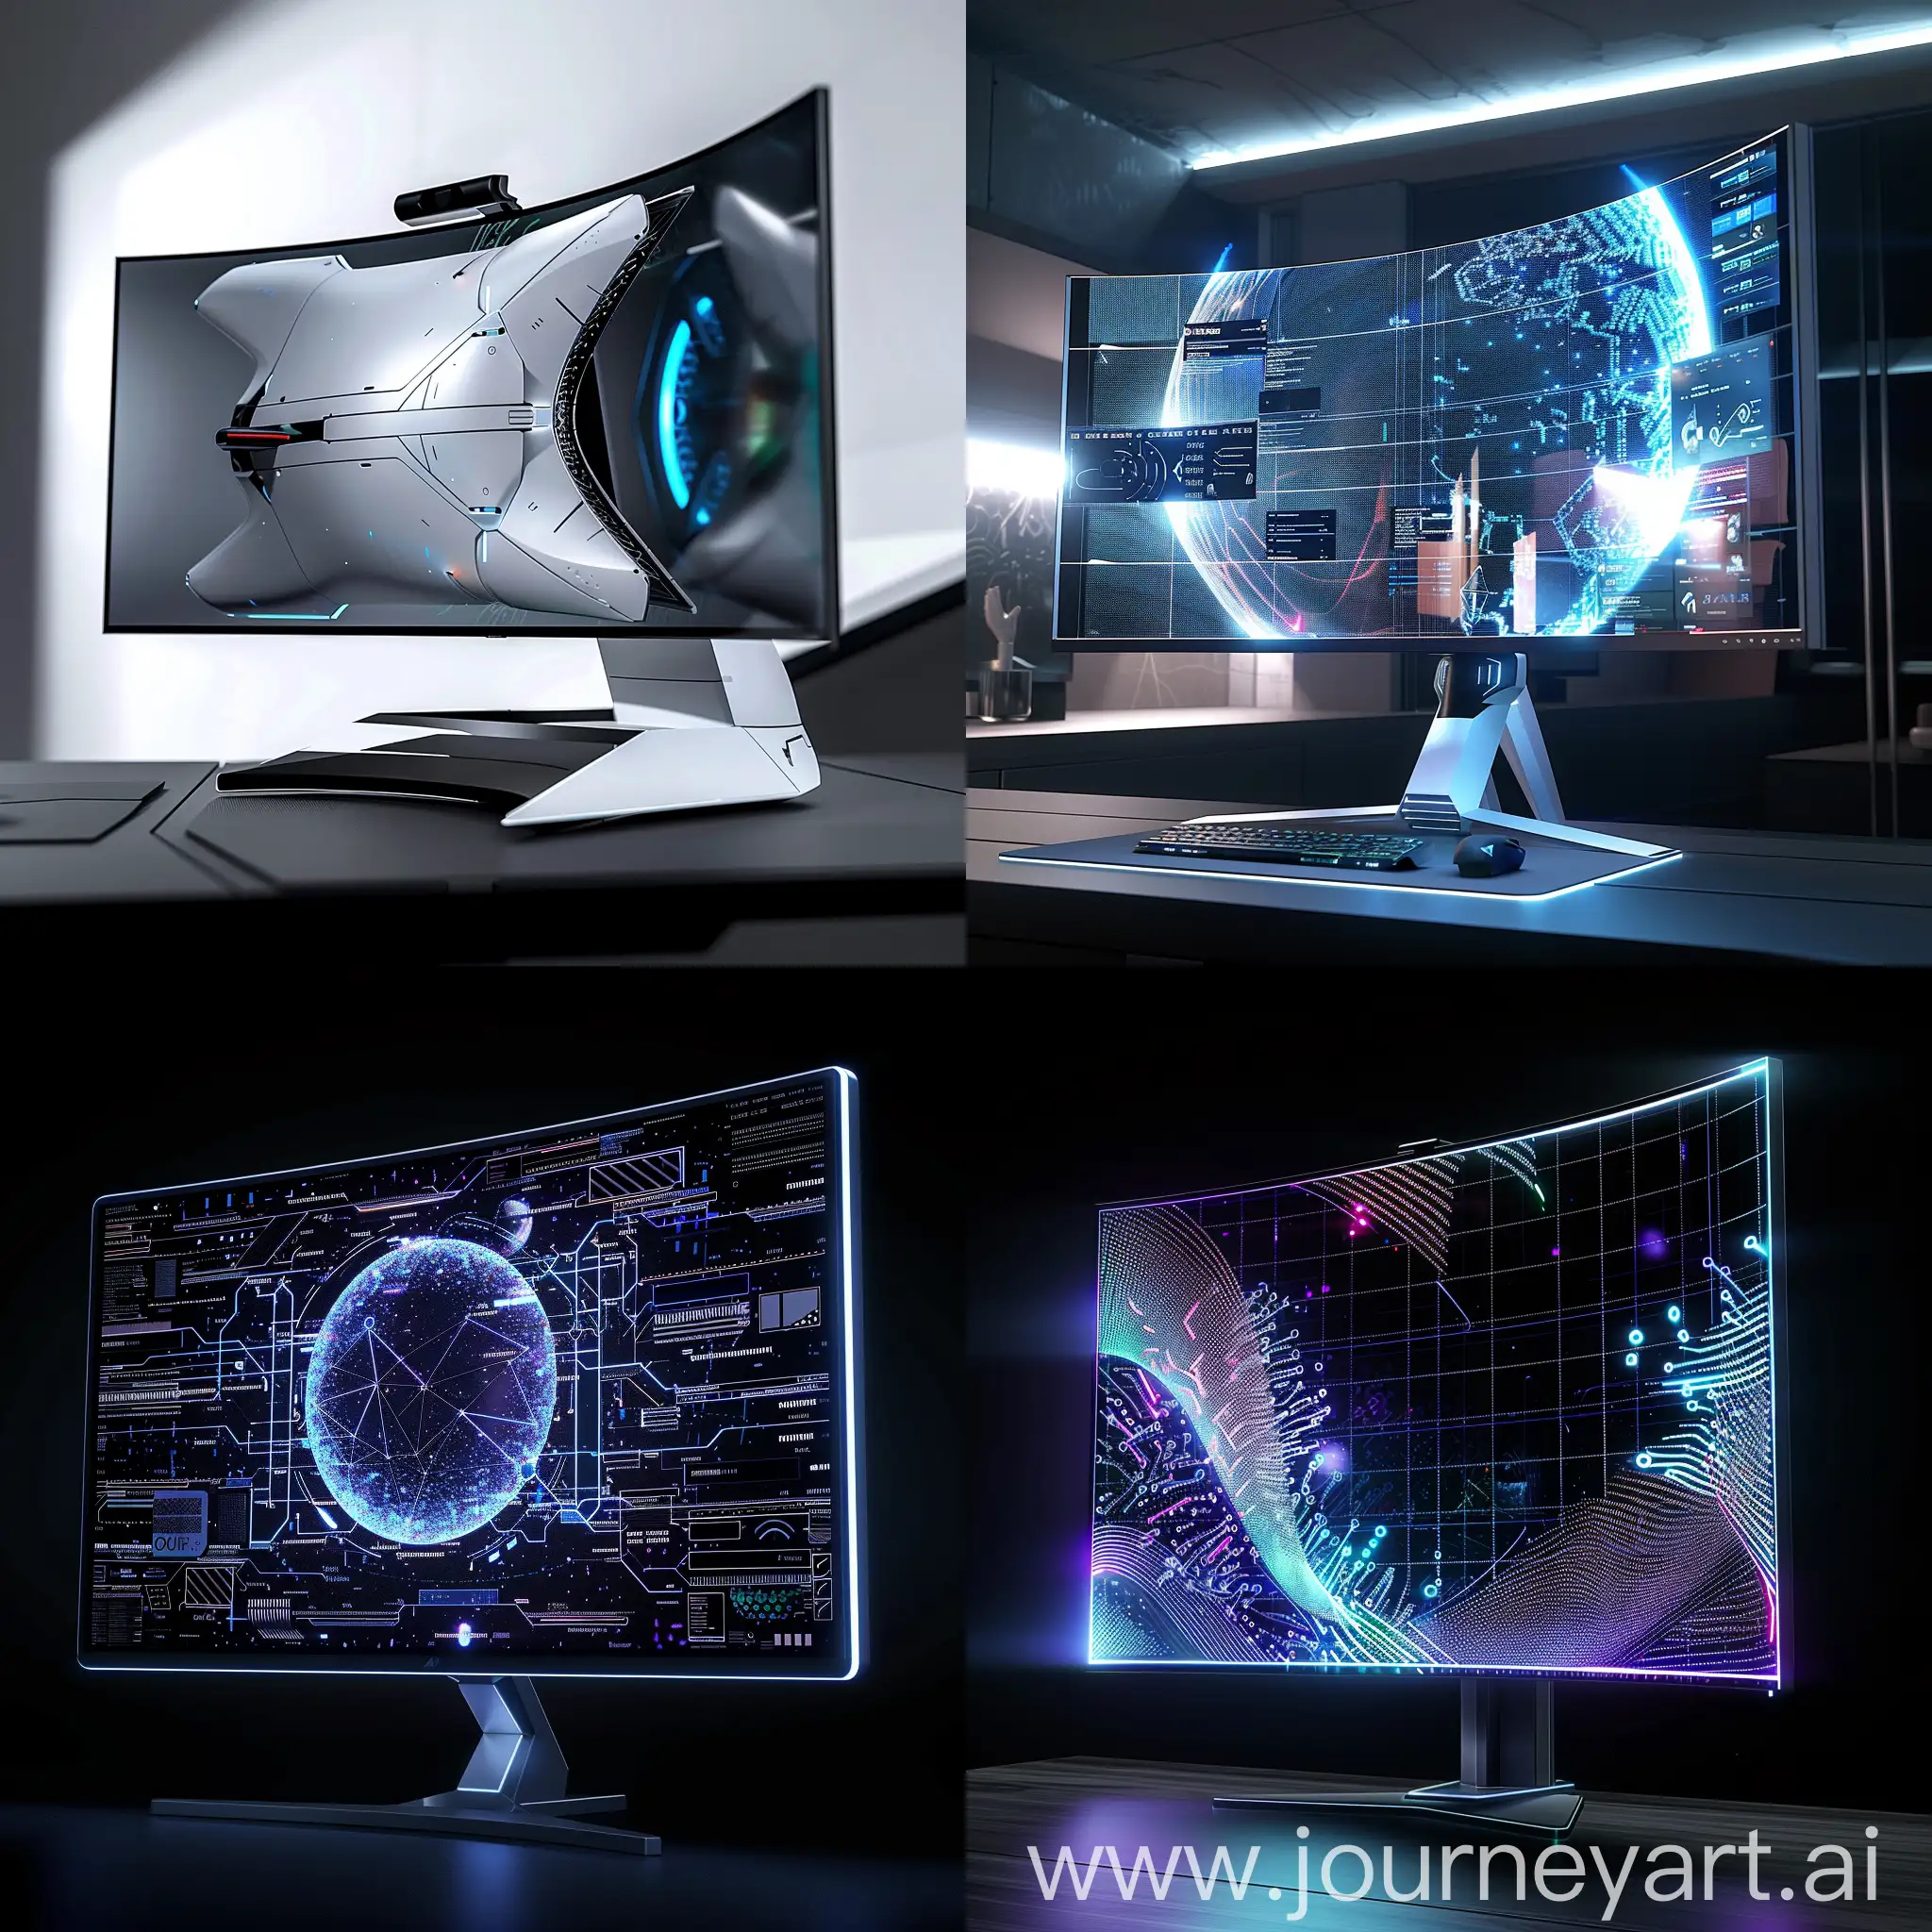 Futuristic-PC-Monitor-with-Flexible-OLED-Display-and-Holographic-Technology